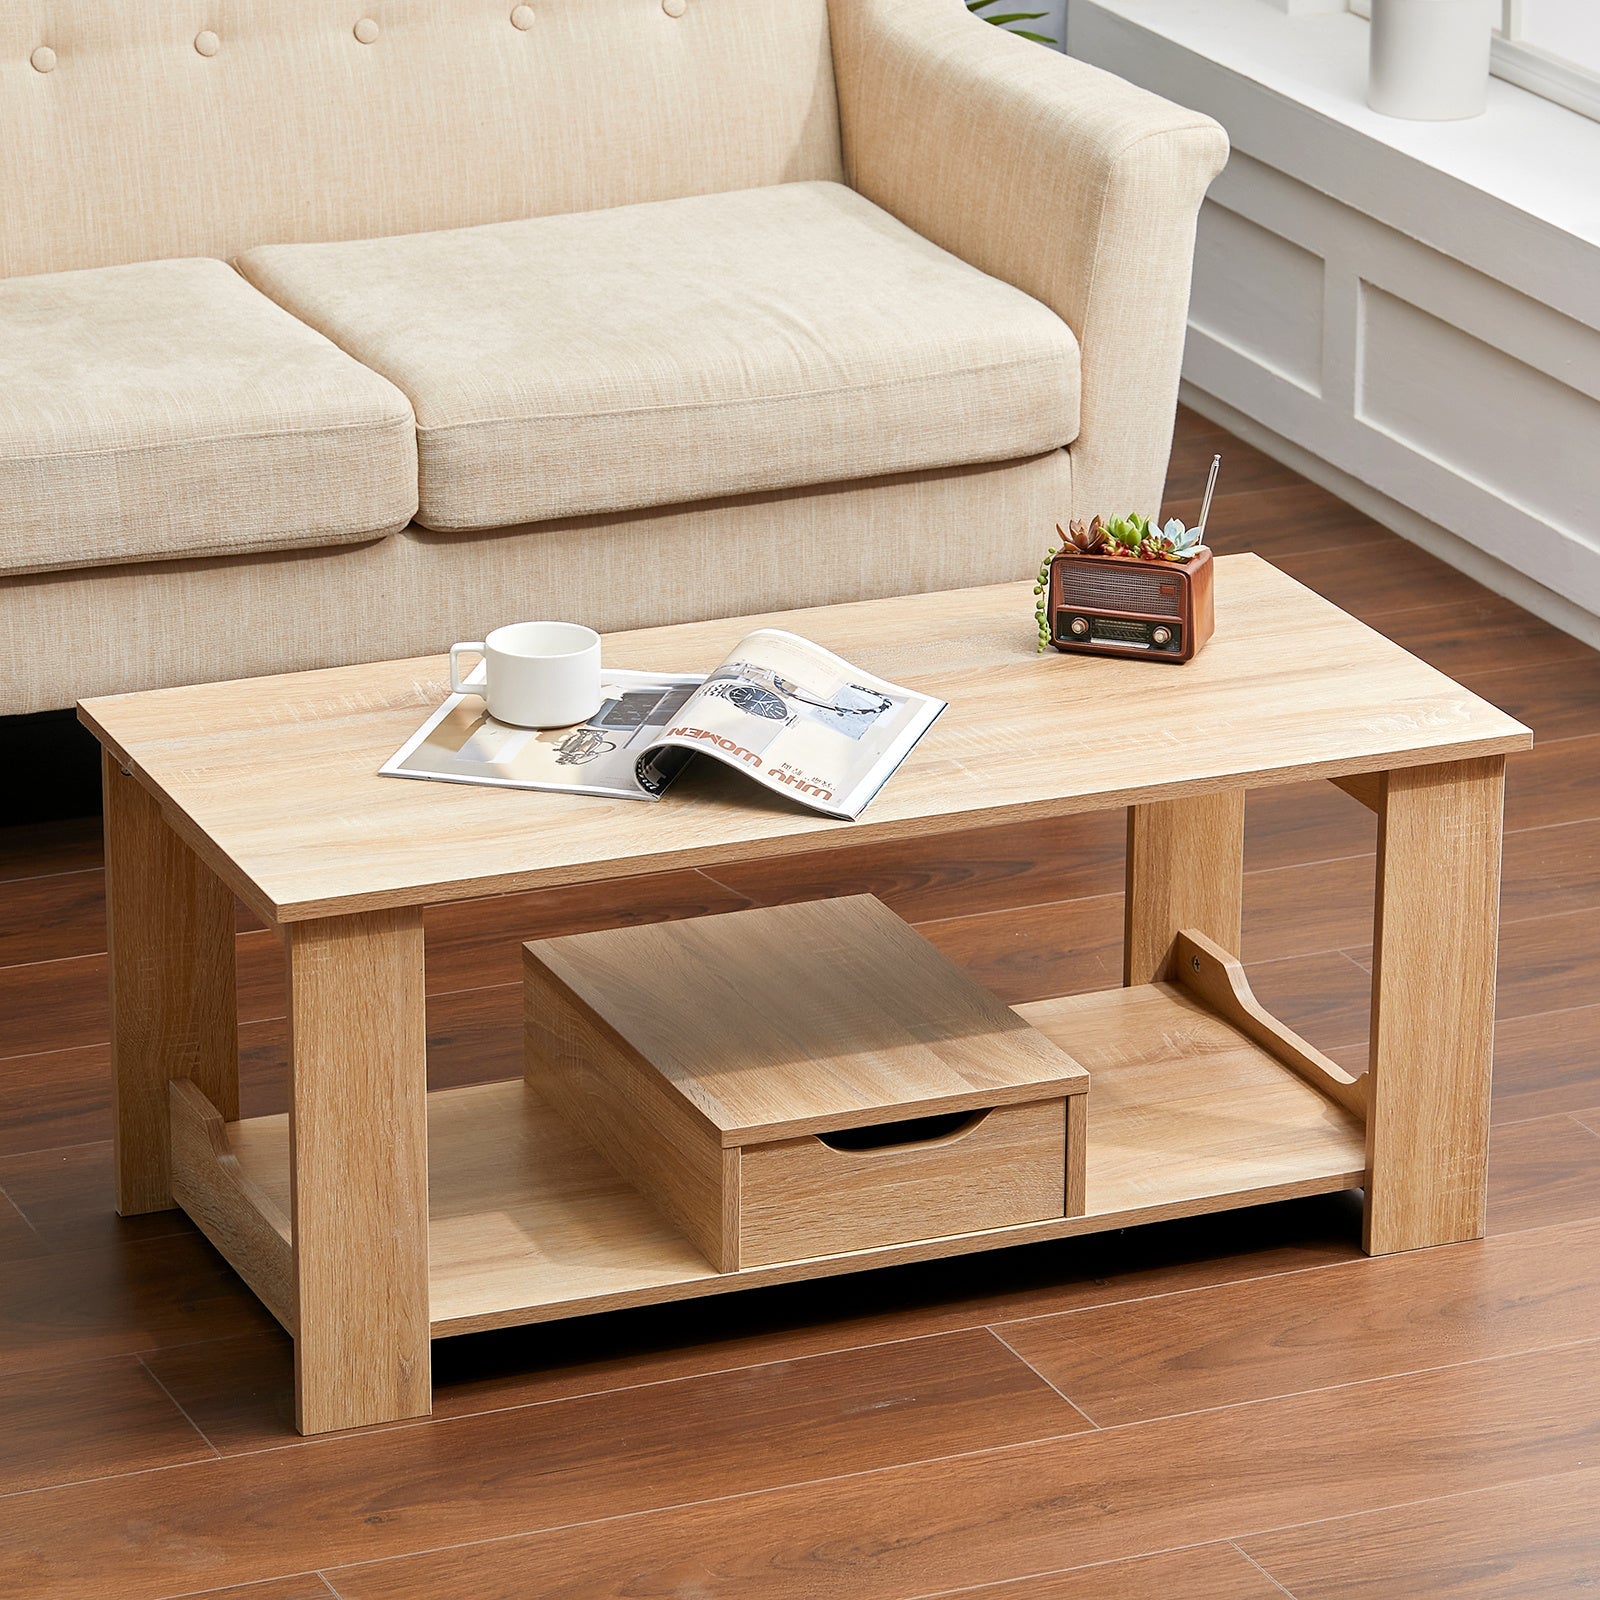 2 Tier Wooden Coffee Table with Drawer for Living Room